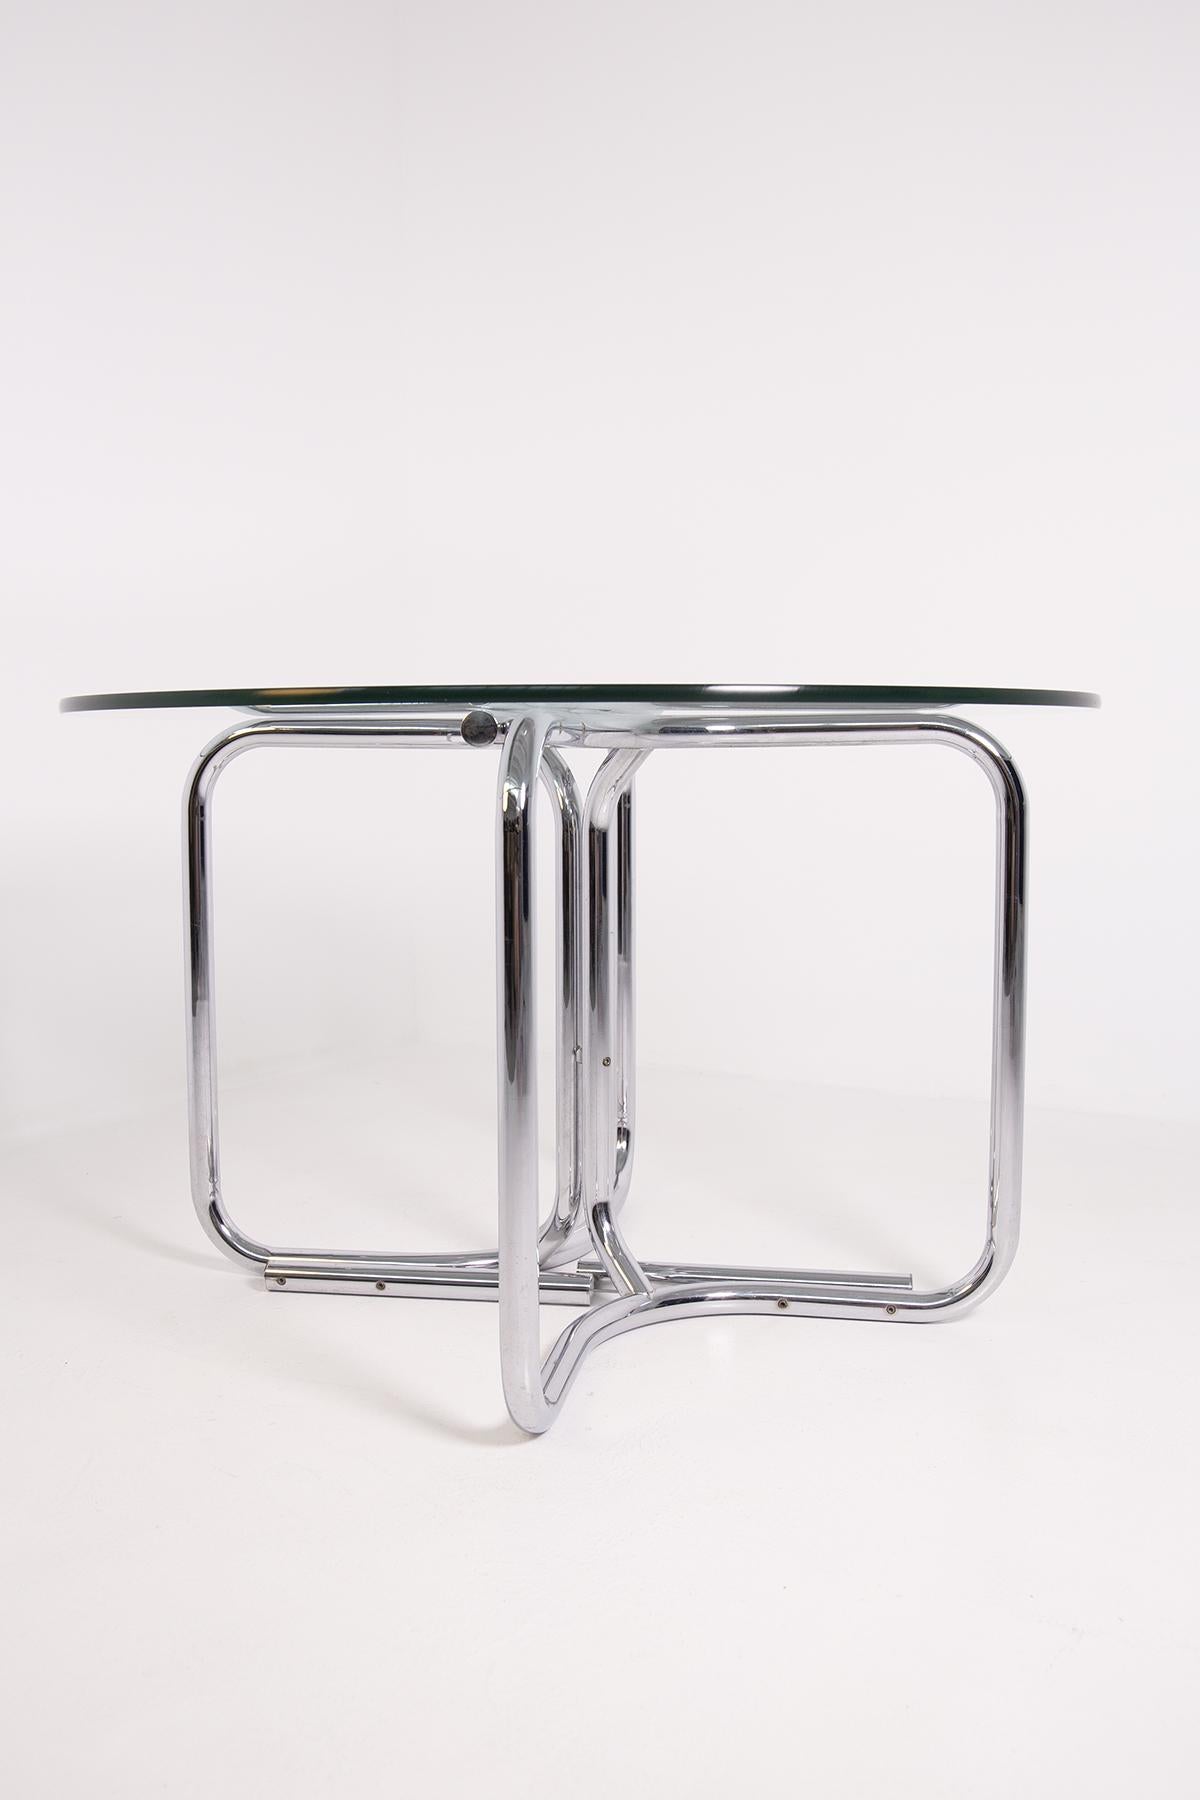 Italian Round Table by Giotto Stoppino in Steel and Glass 5